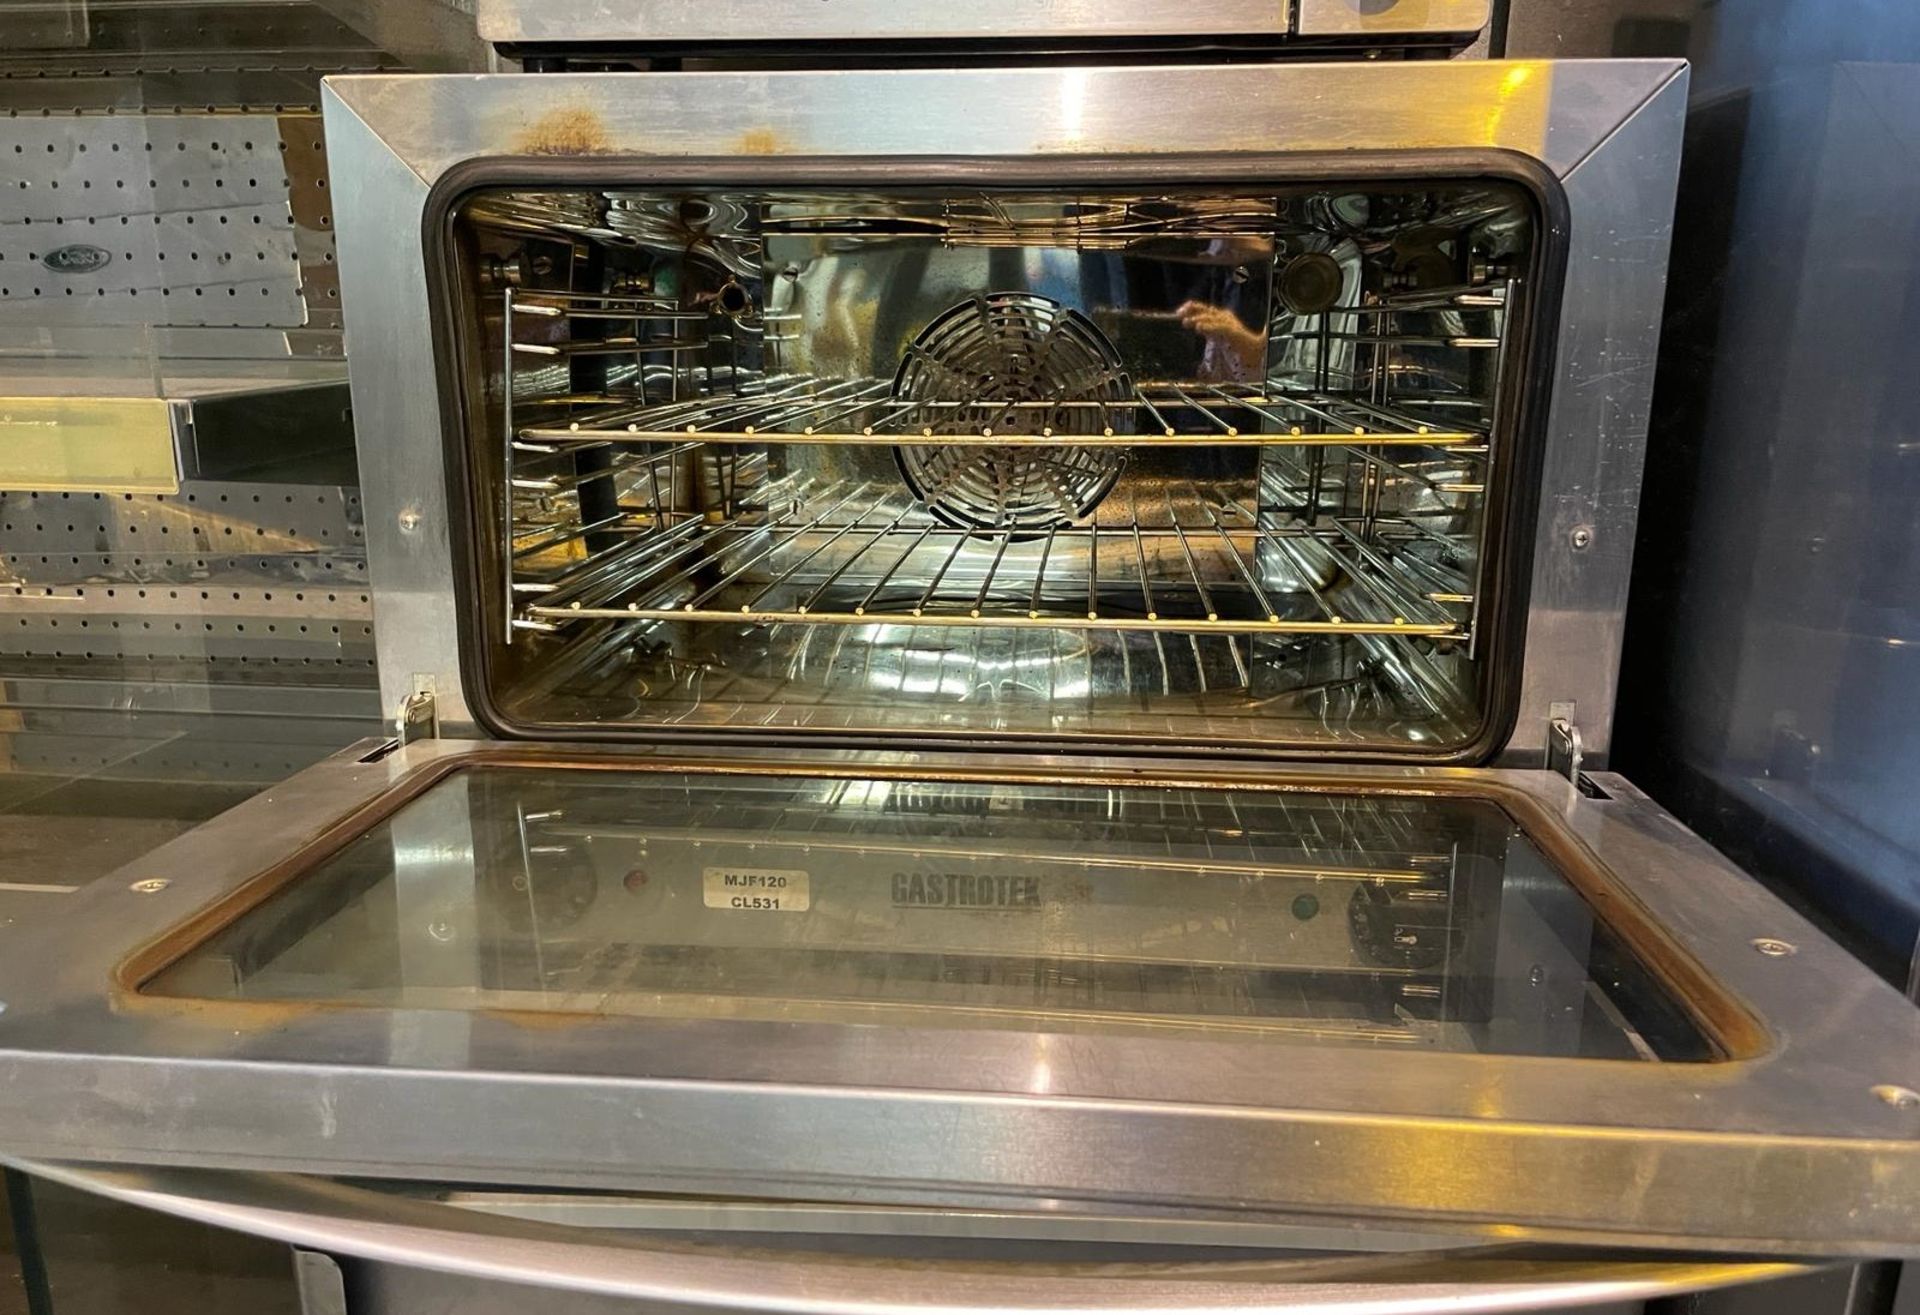 1 x Gastrotek Countertop Commercial Oven With a Stainless Steel Finish - Bild 4 aus 5